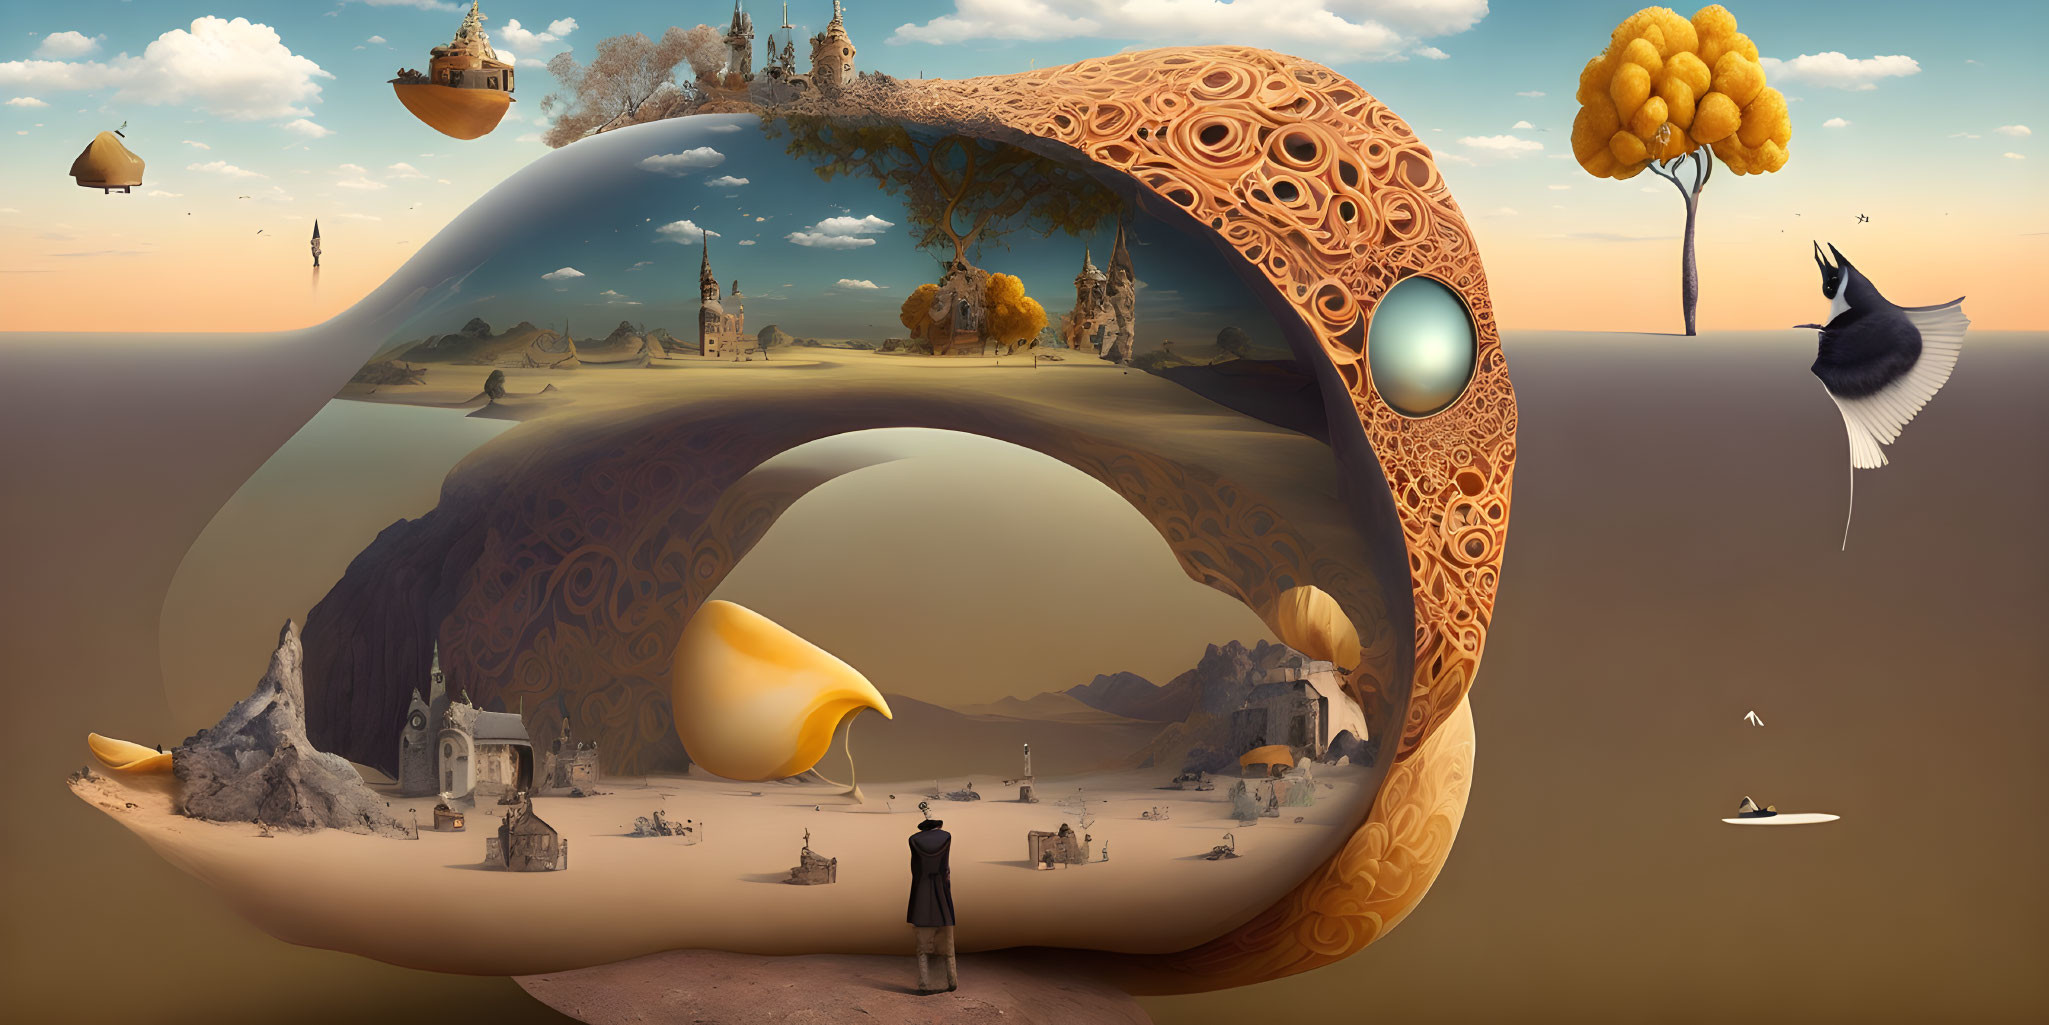 Surreal landscape with eye-shaped structure, floating islands, person, whimsical details